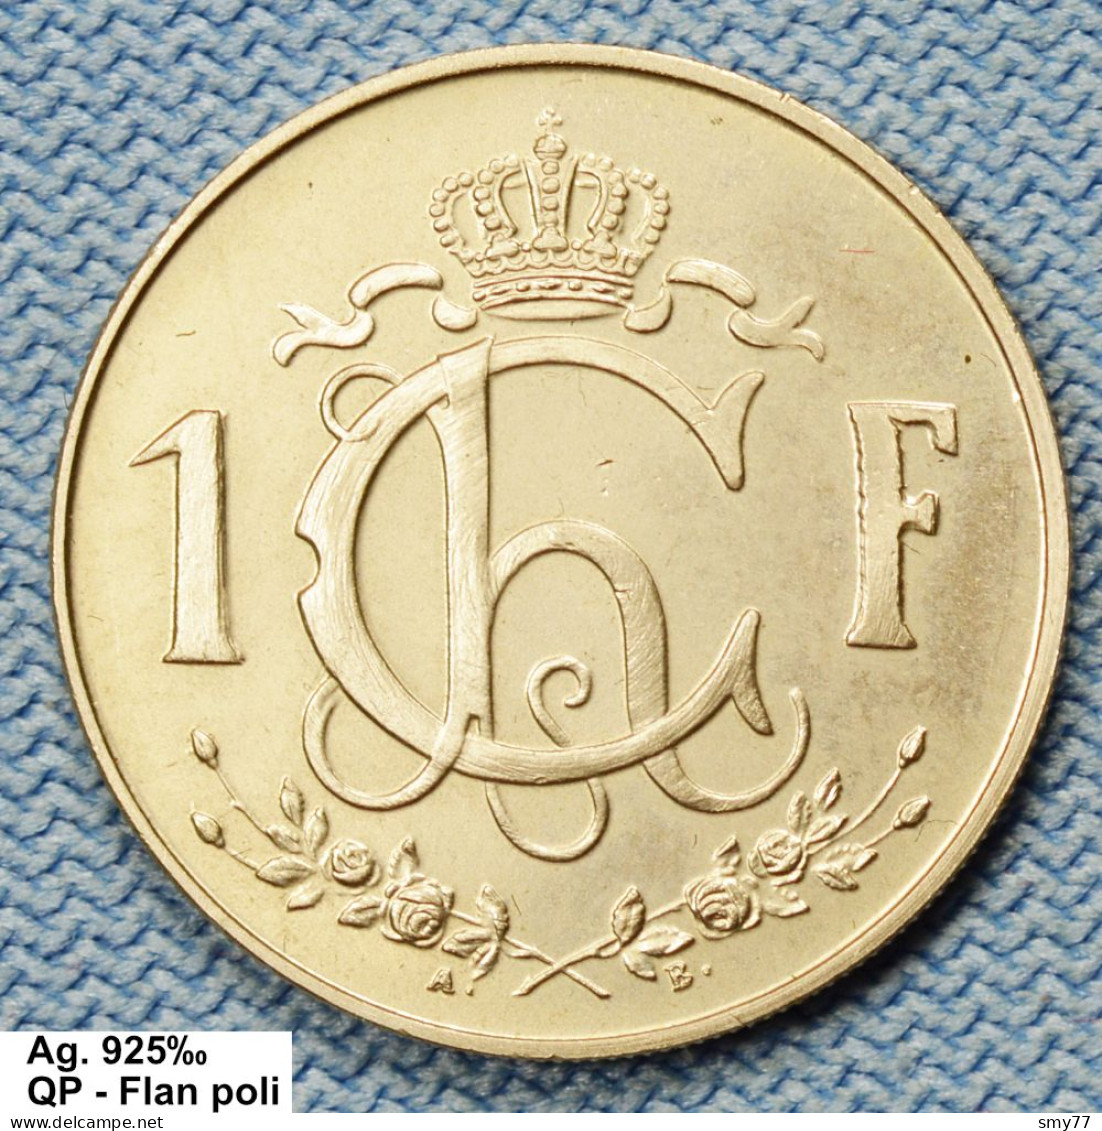 Luxembourg • 1 Franc 1980  Argent / Silver 925‰ (Charlotte) •  QP / Flan Poli  •  3'000 Ex.  • Rare •  [24-460] - Luxembourg